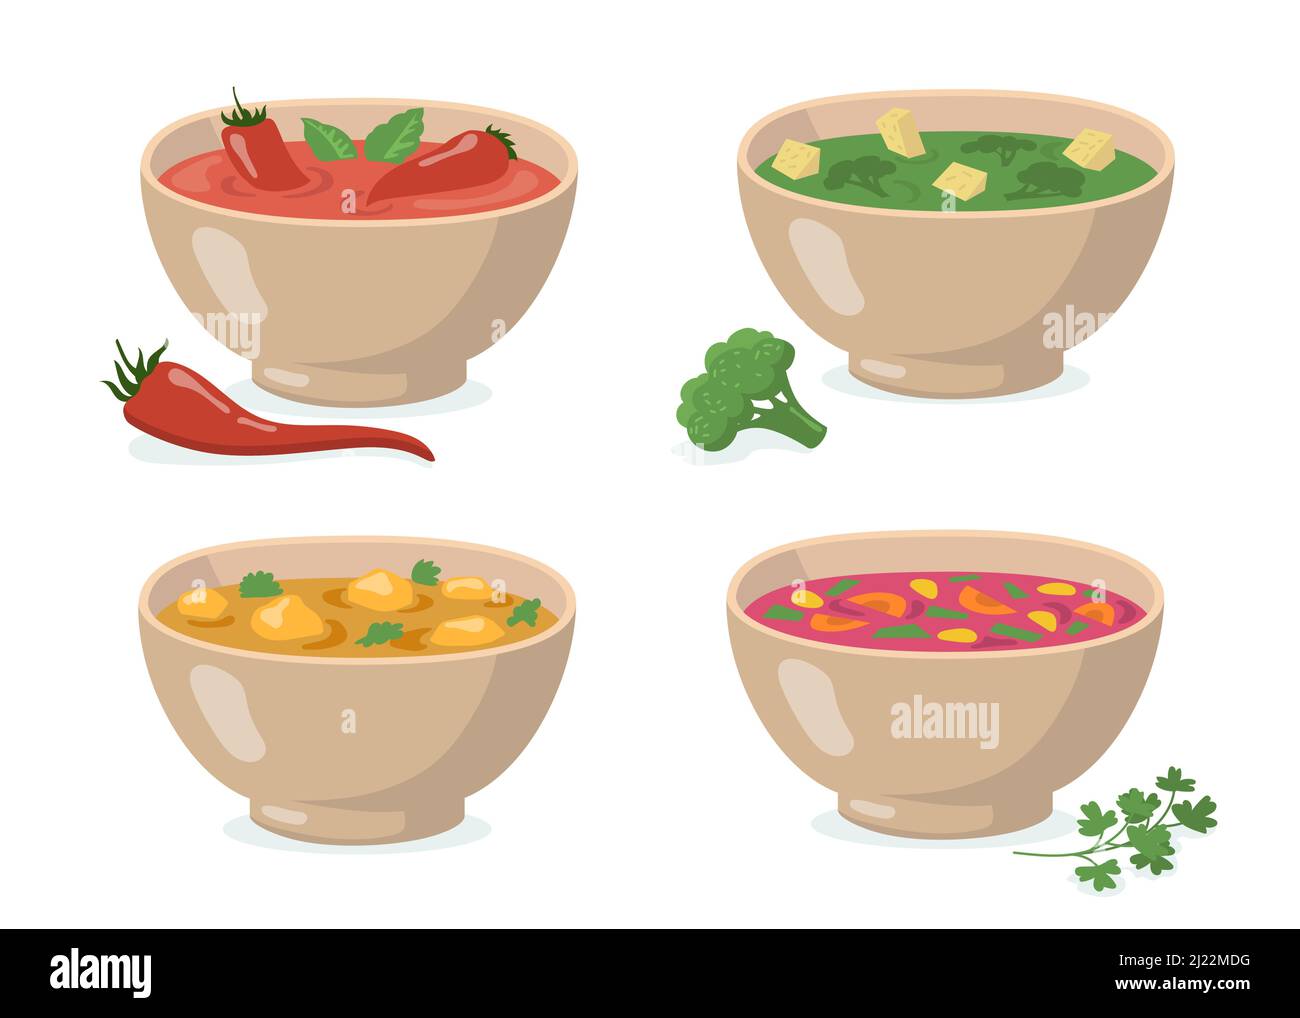 Chicken curry broccoli Stock Vector Images - Alamy